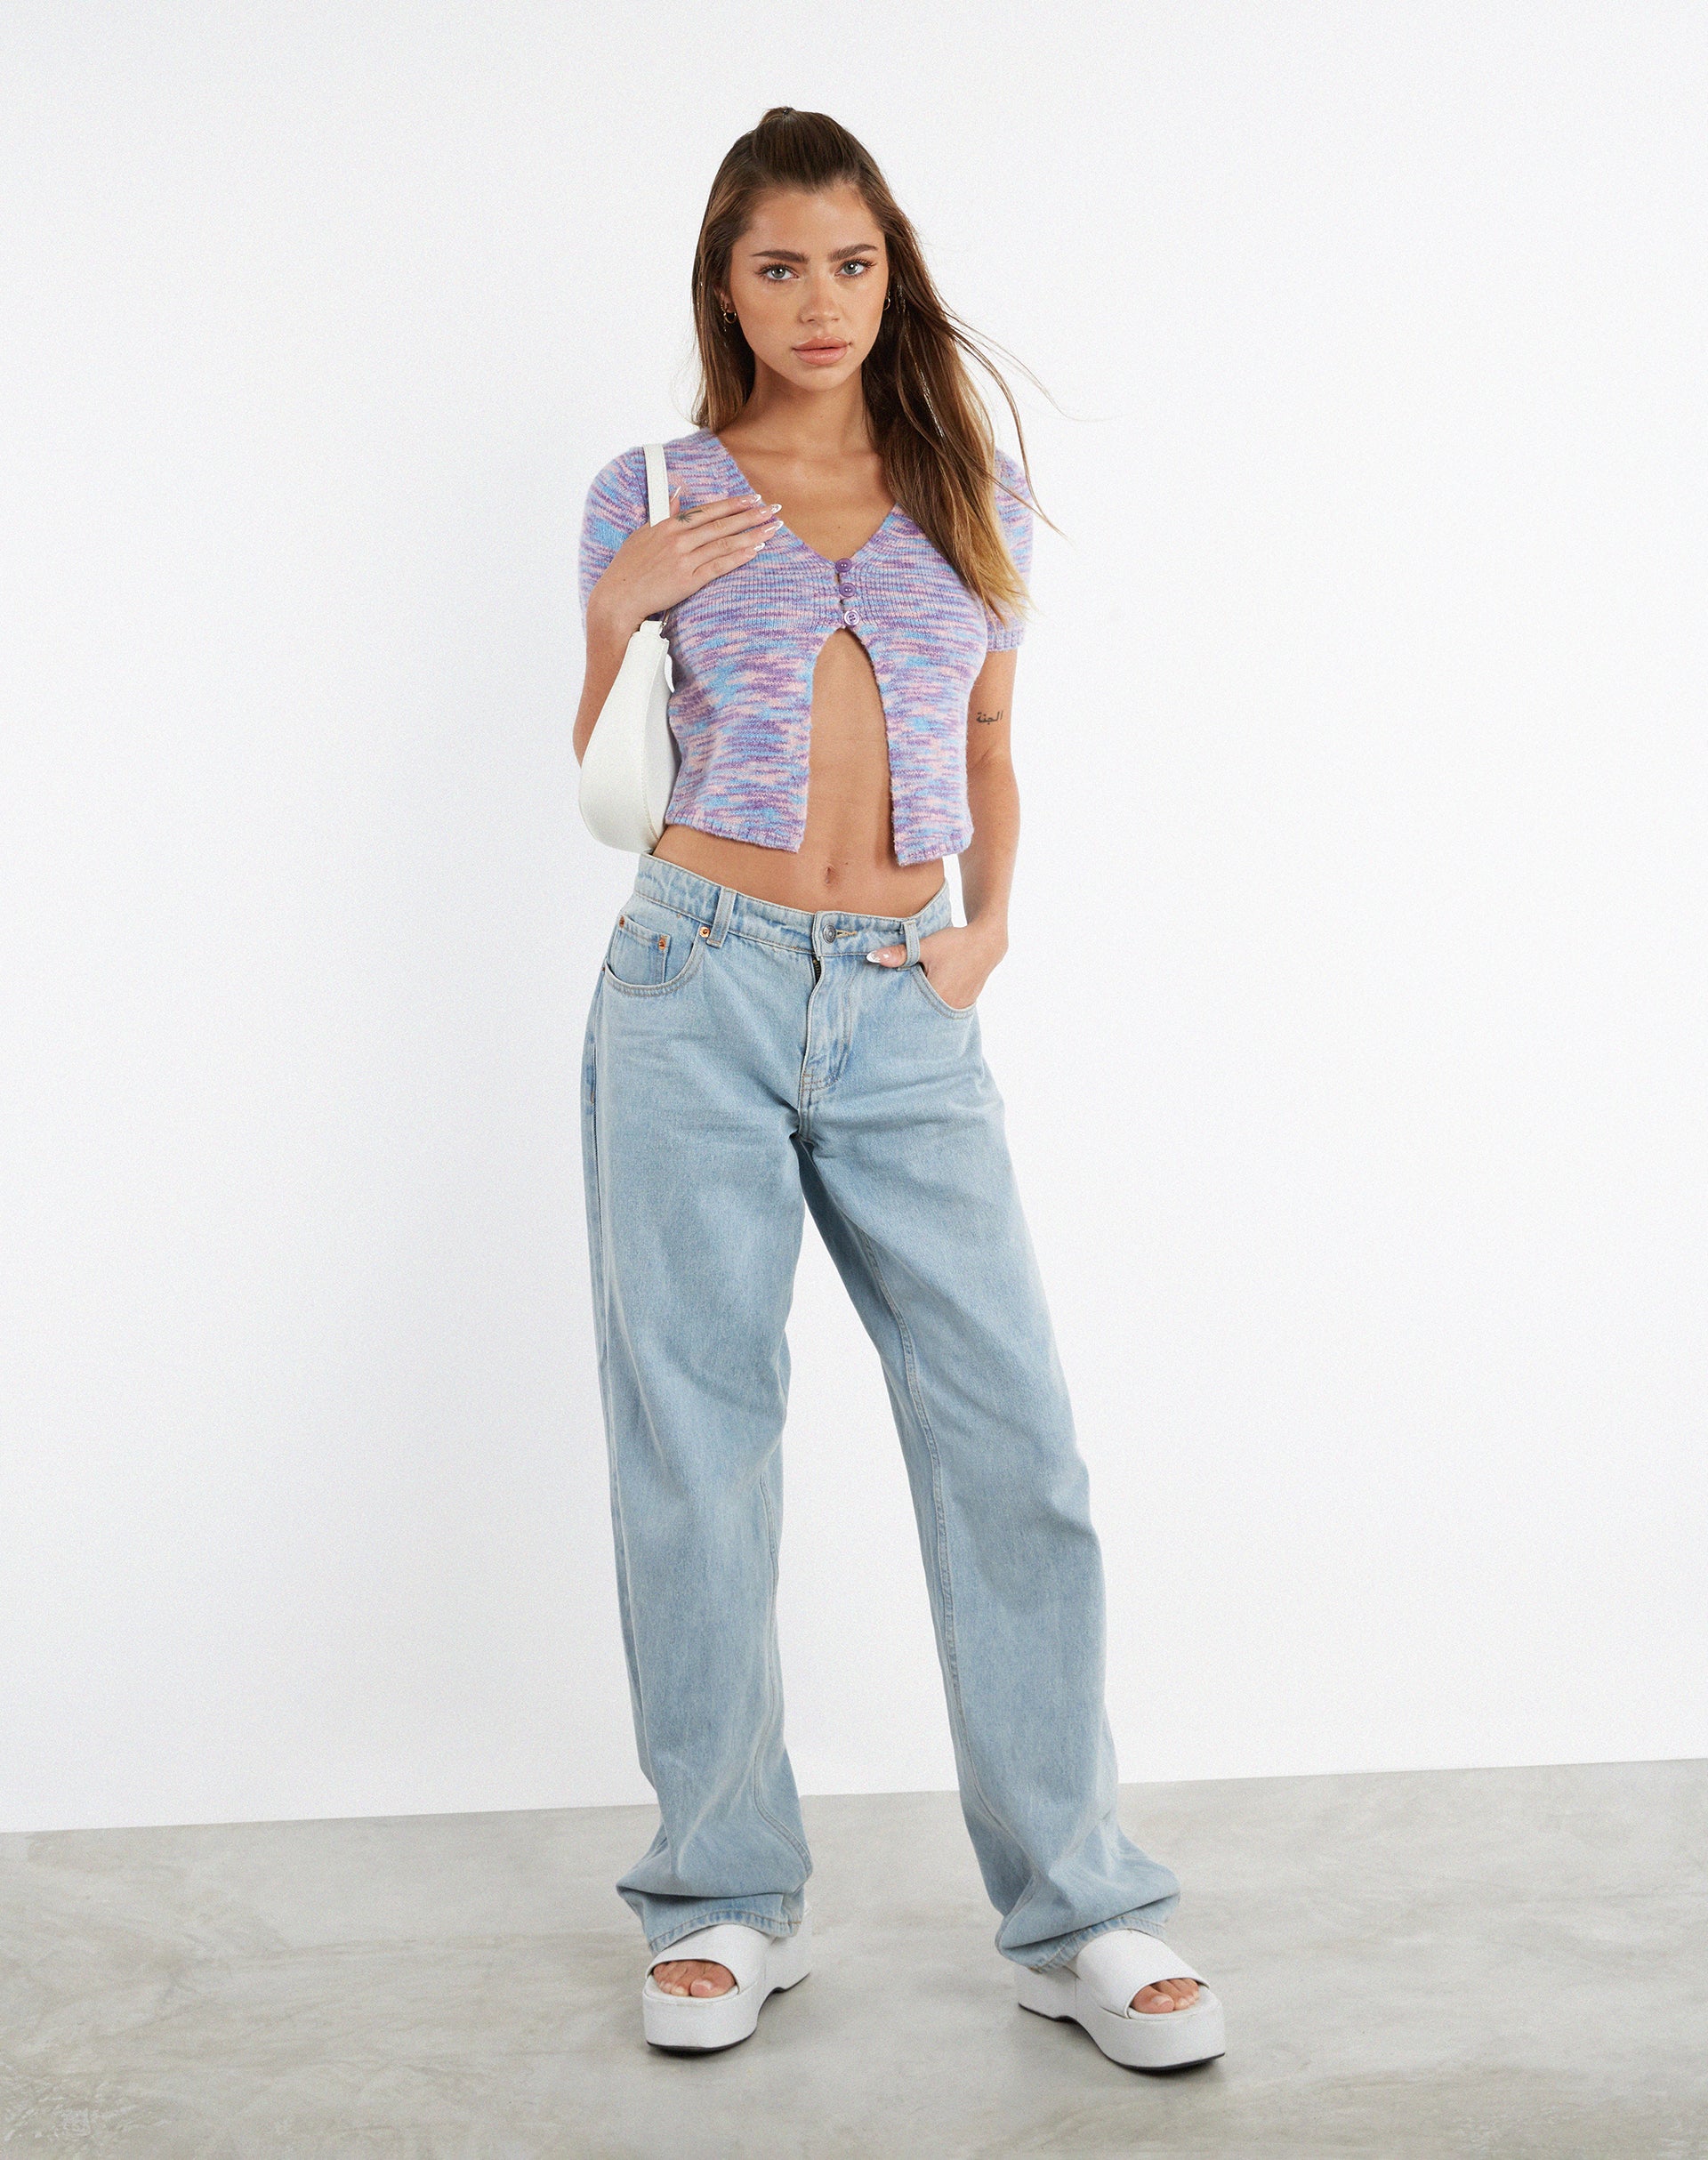 image of MOTEL X JACQUIE Kusha Crop Top in Mix Space Dye Knit Lilac